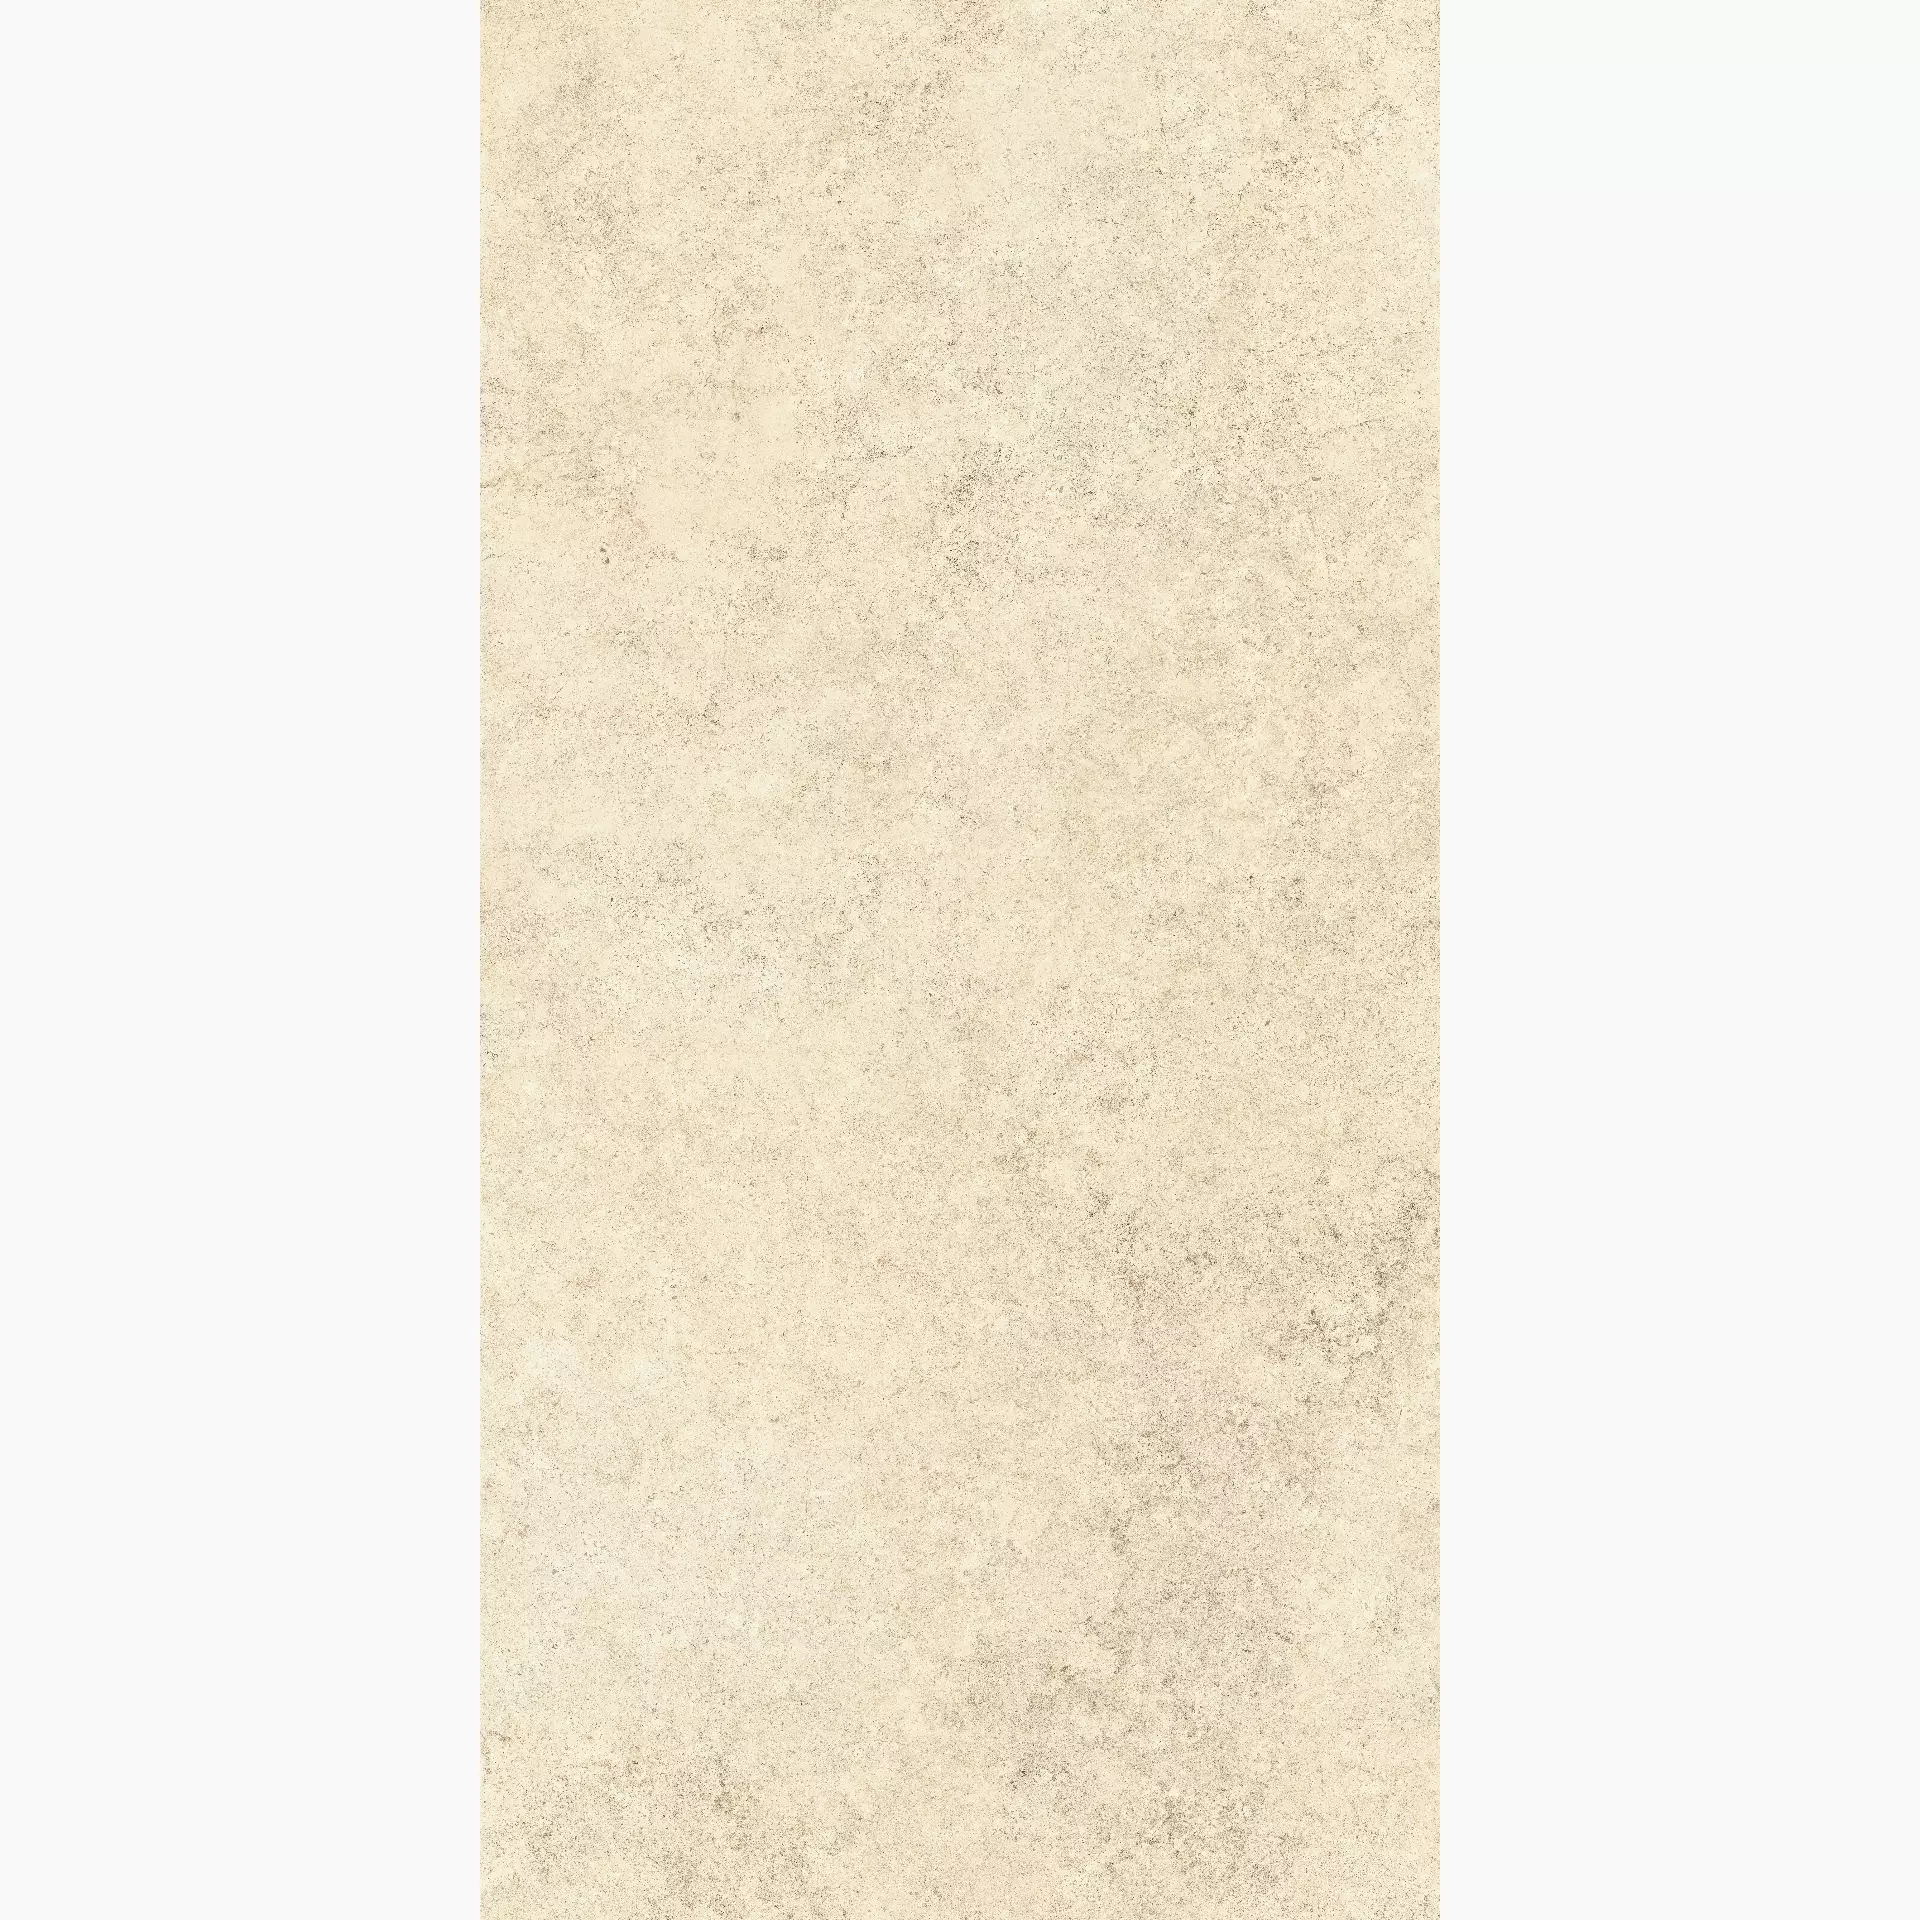 Cottodeste Pura Ivory Honed Protect EGXPRH1 60x120cm rectified 14mm